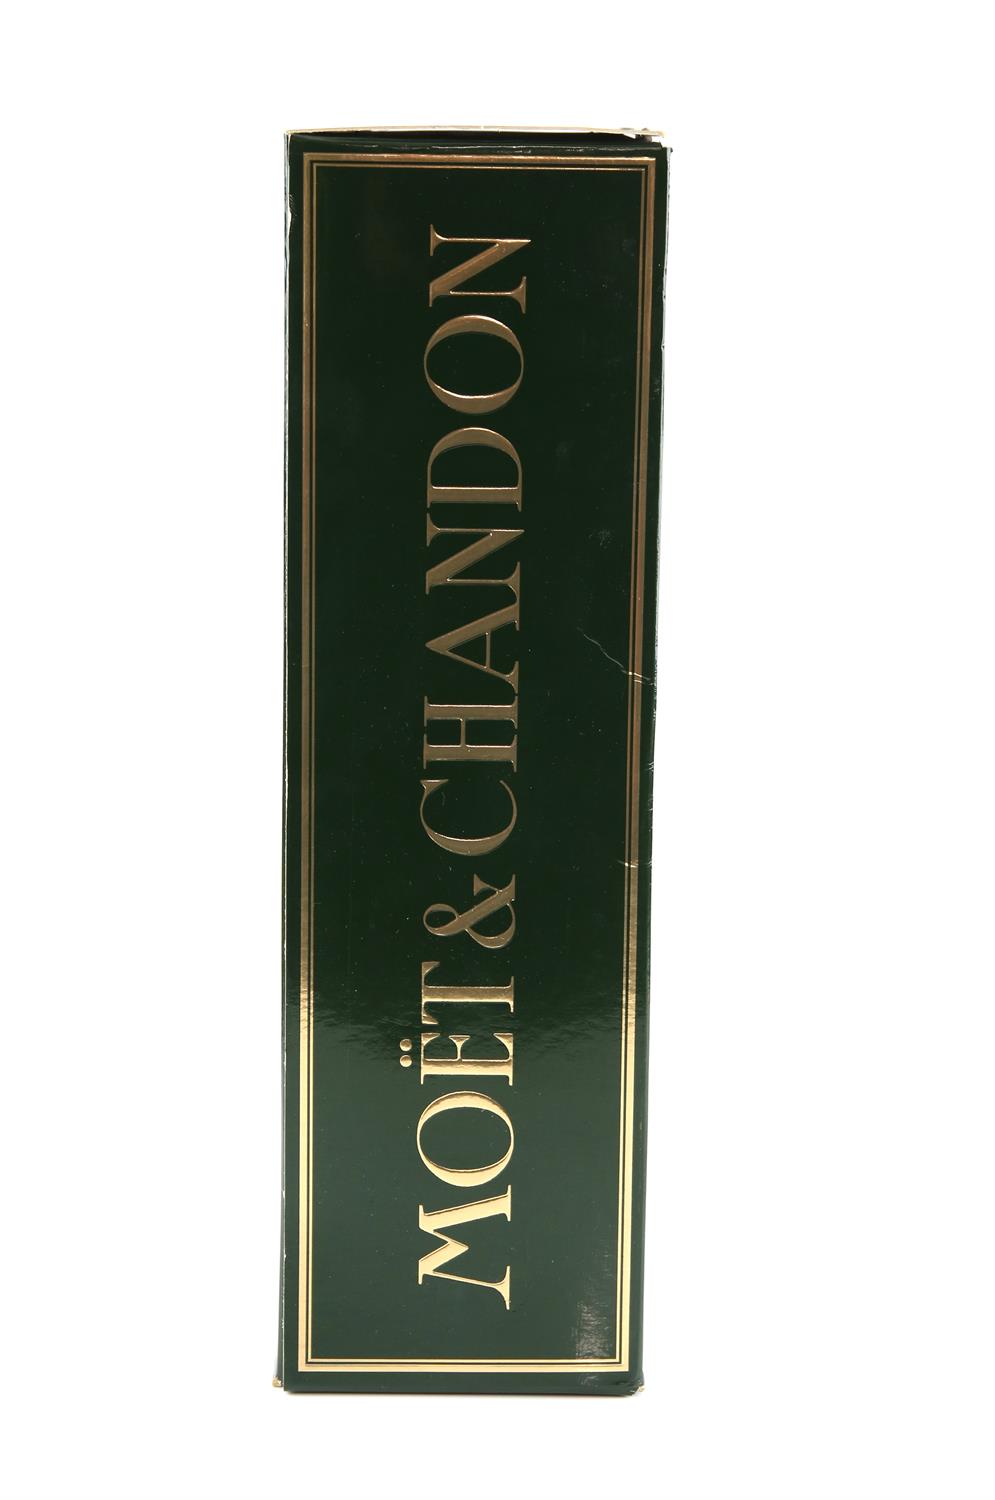 One magnum of Moet & Chandon Brut Imperial Champagne, 150cl, in original box - Image 2 of 3